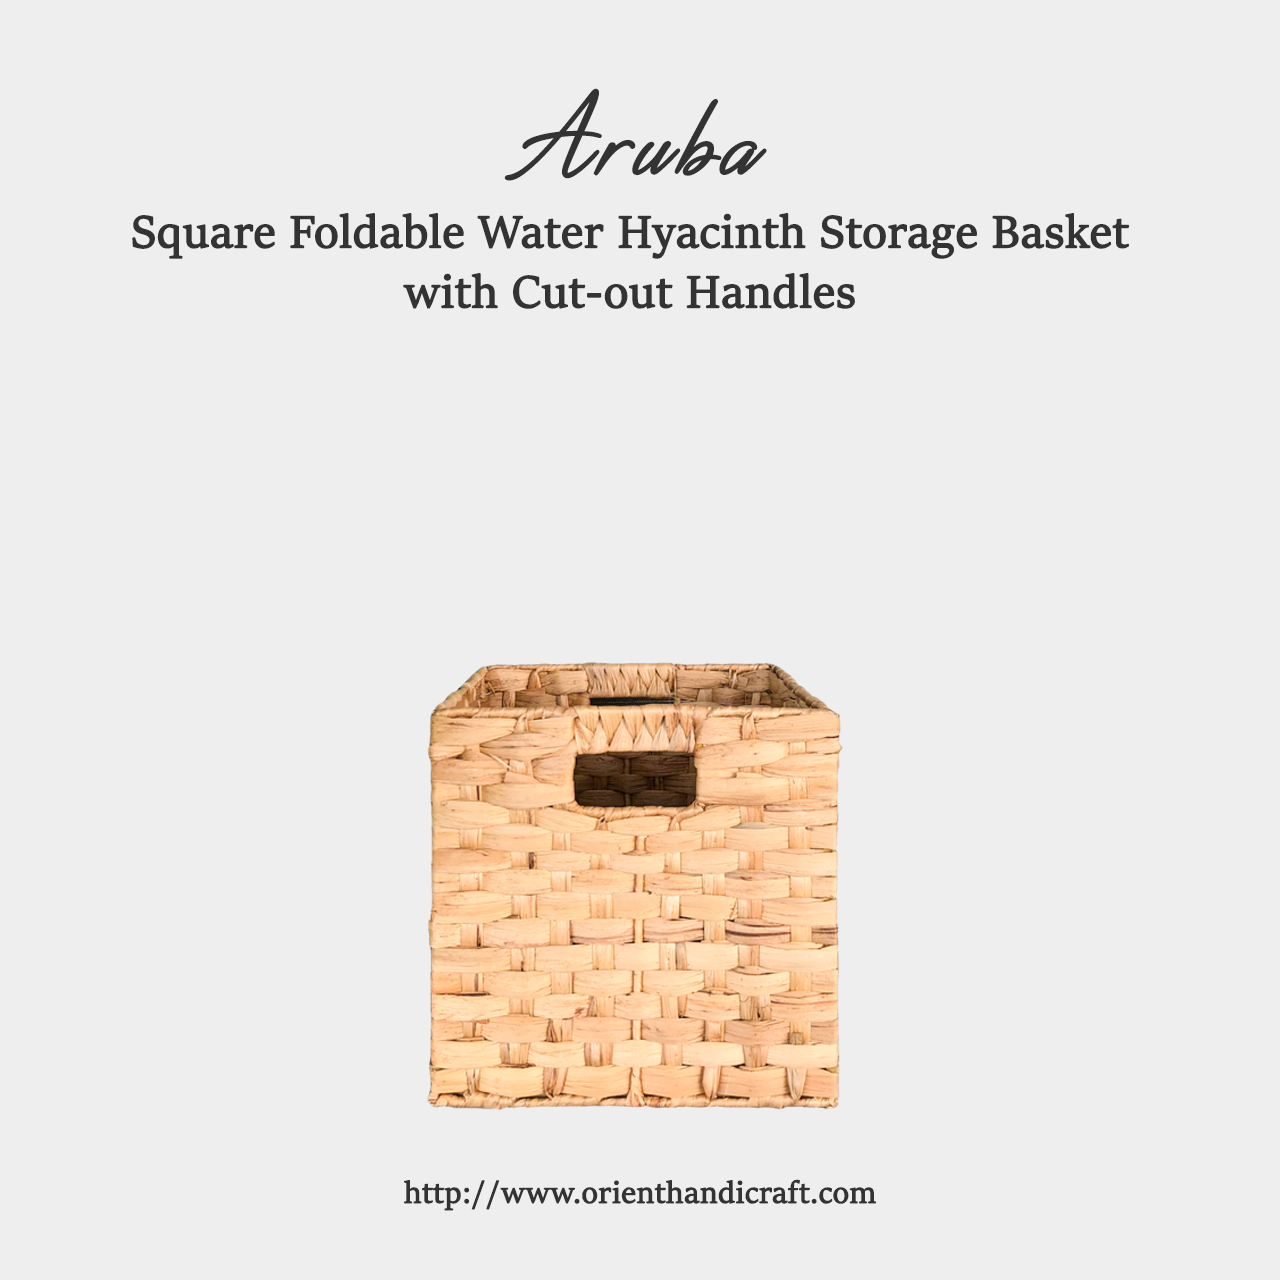 Square Foldable Water Hyacinth Storage Basket with Handles